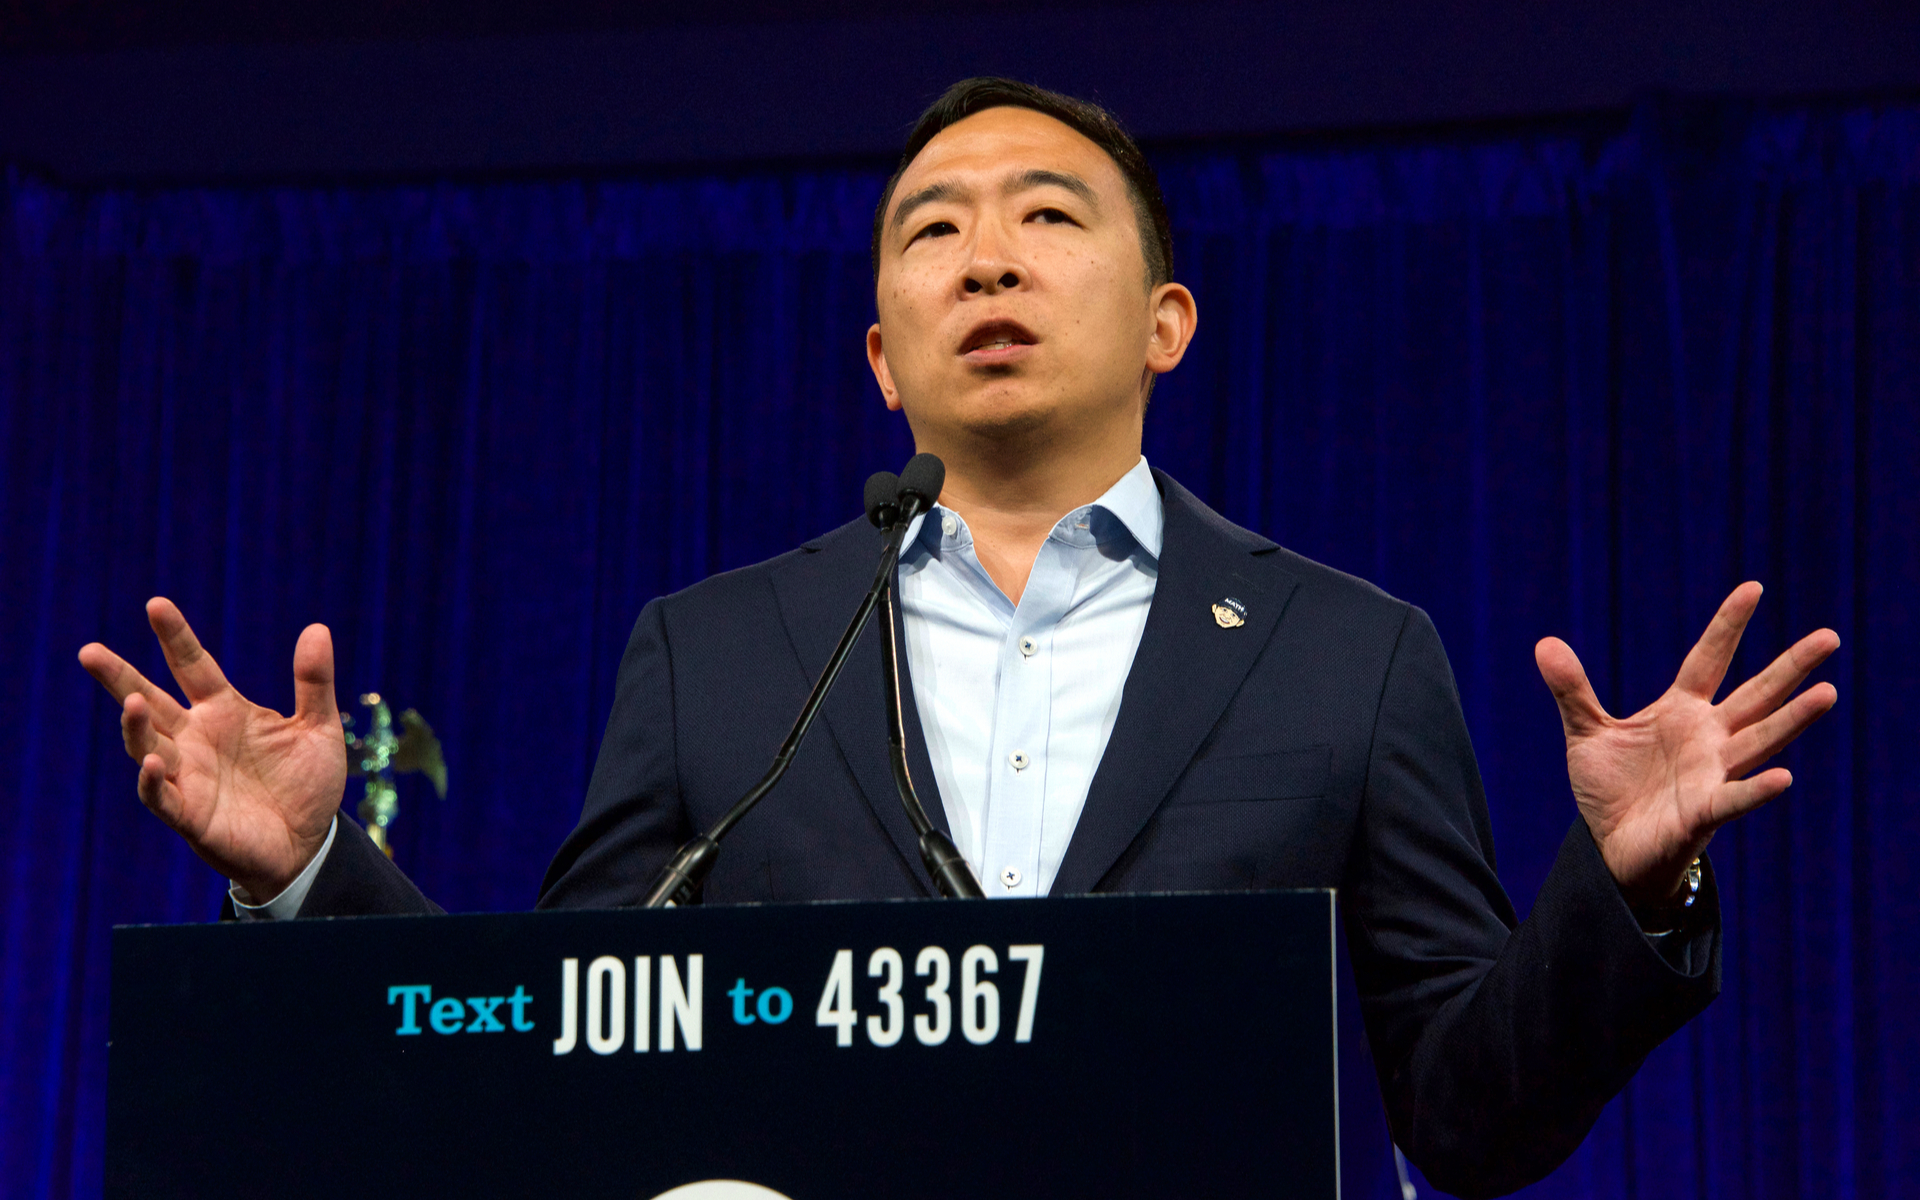 Bitcoin for Monthly $1K Payouts? Andrew Yang Says Yea